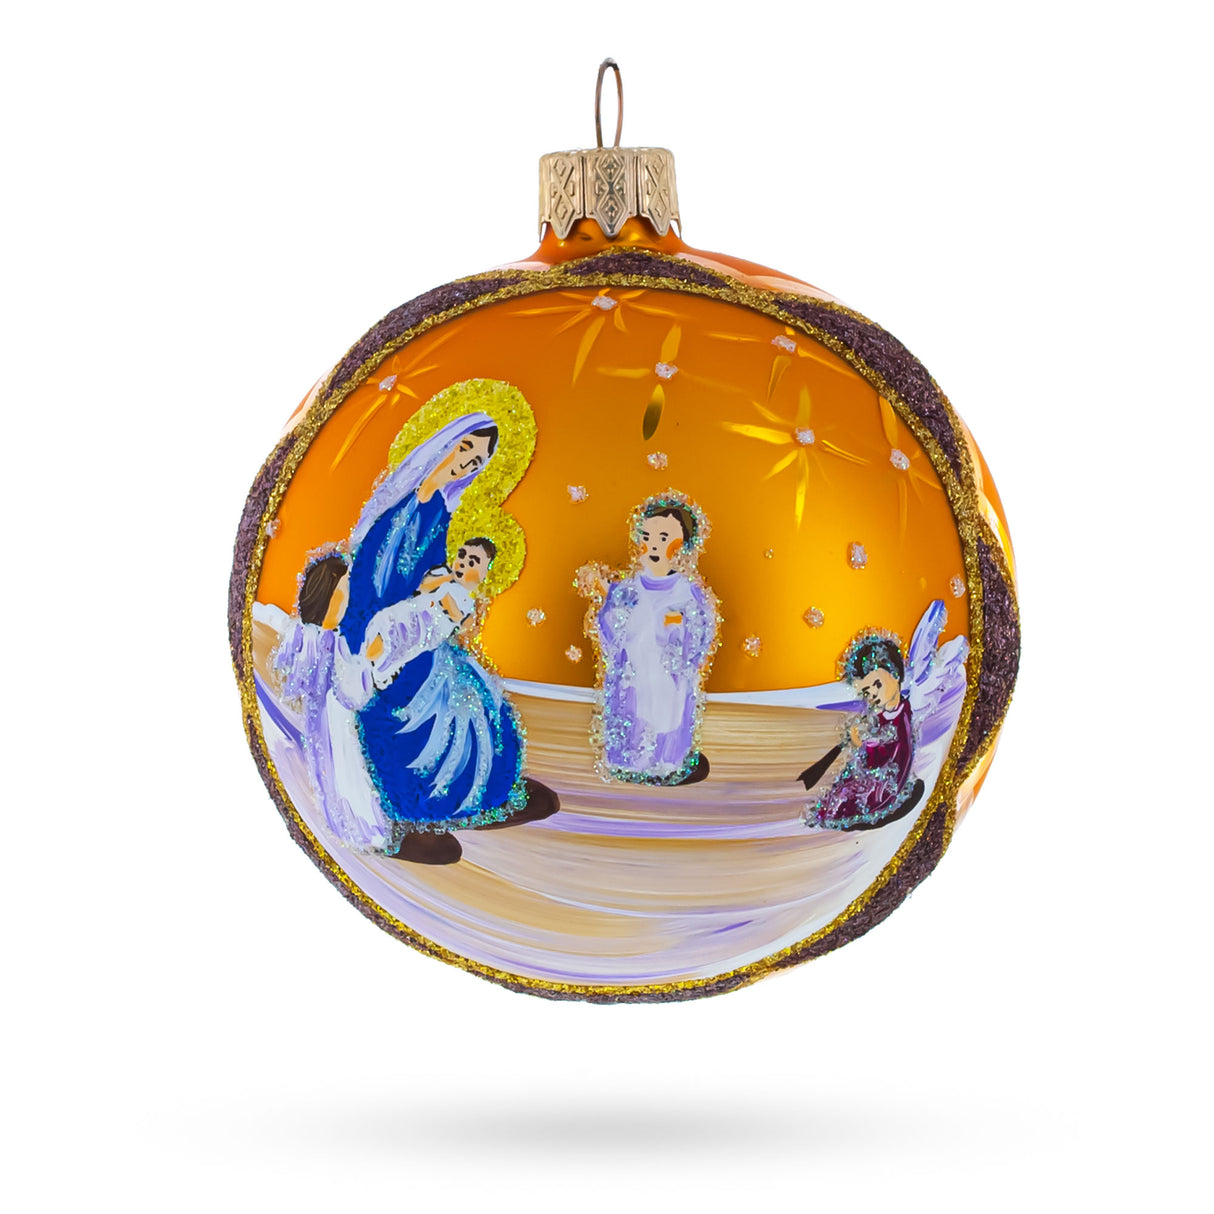 Glass Divine Angels Greeting Jesus - Blown Glass Ball Christmas Ornament 3.25 Inches in Orange color Round